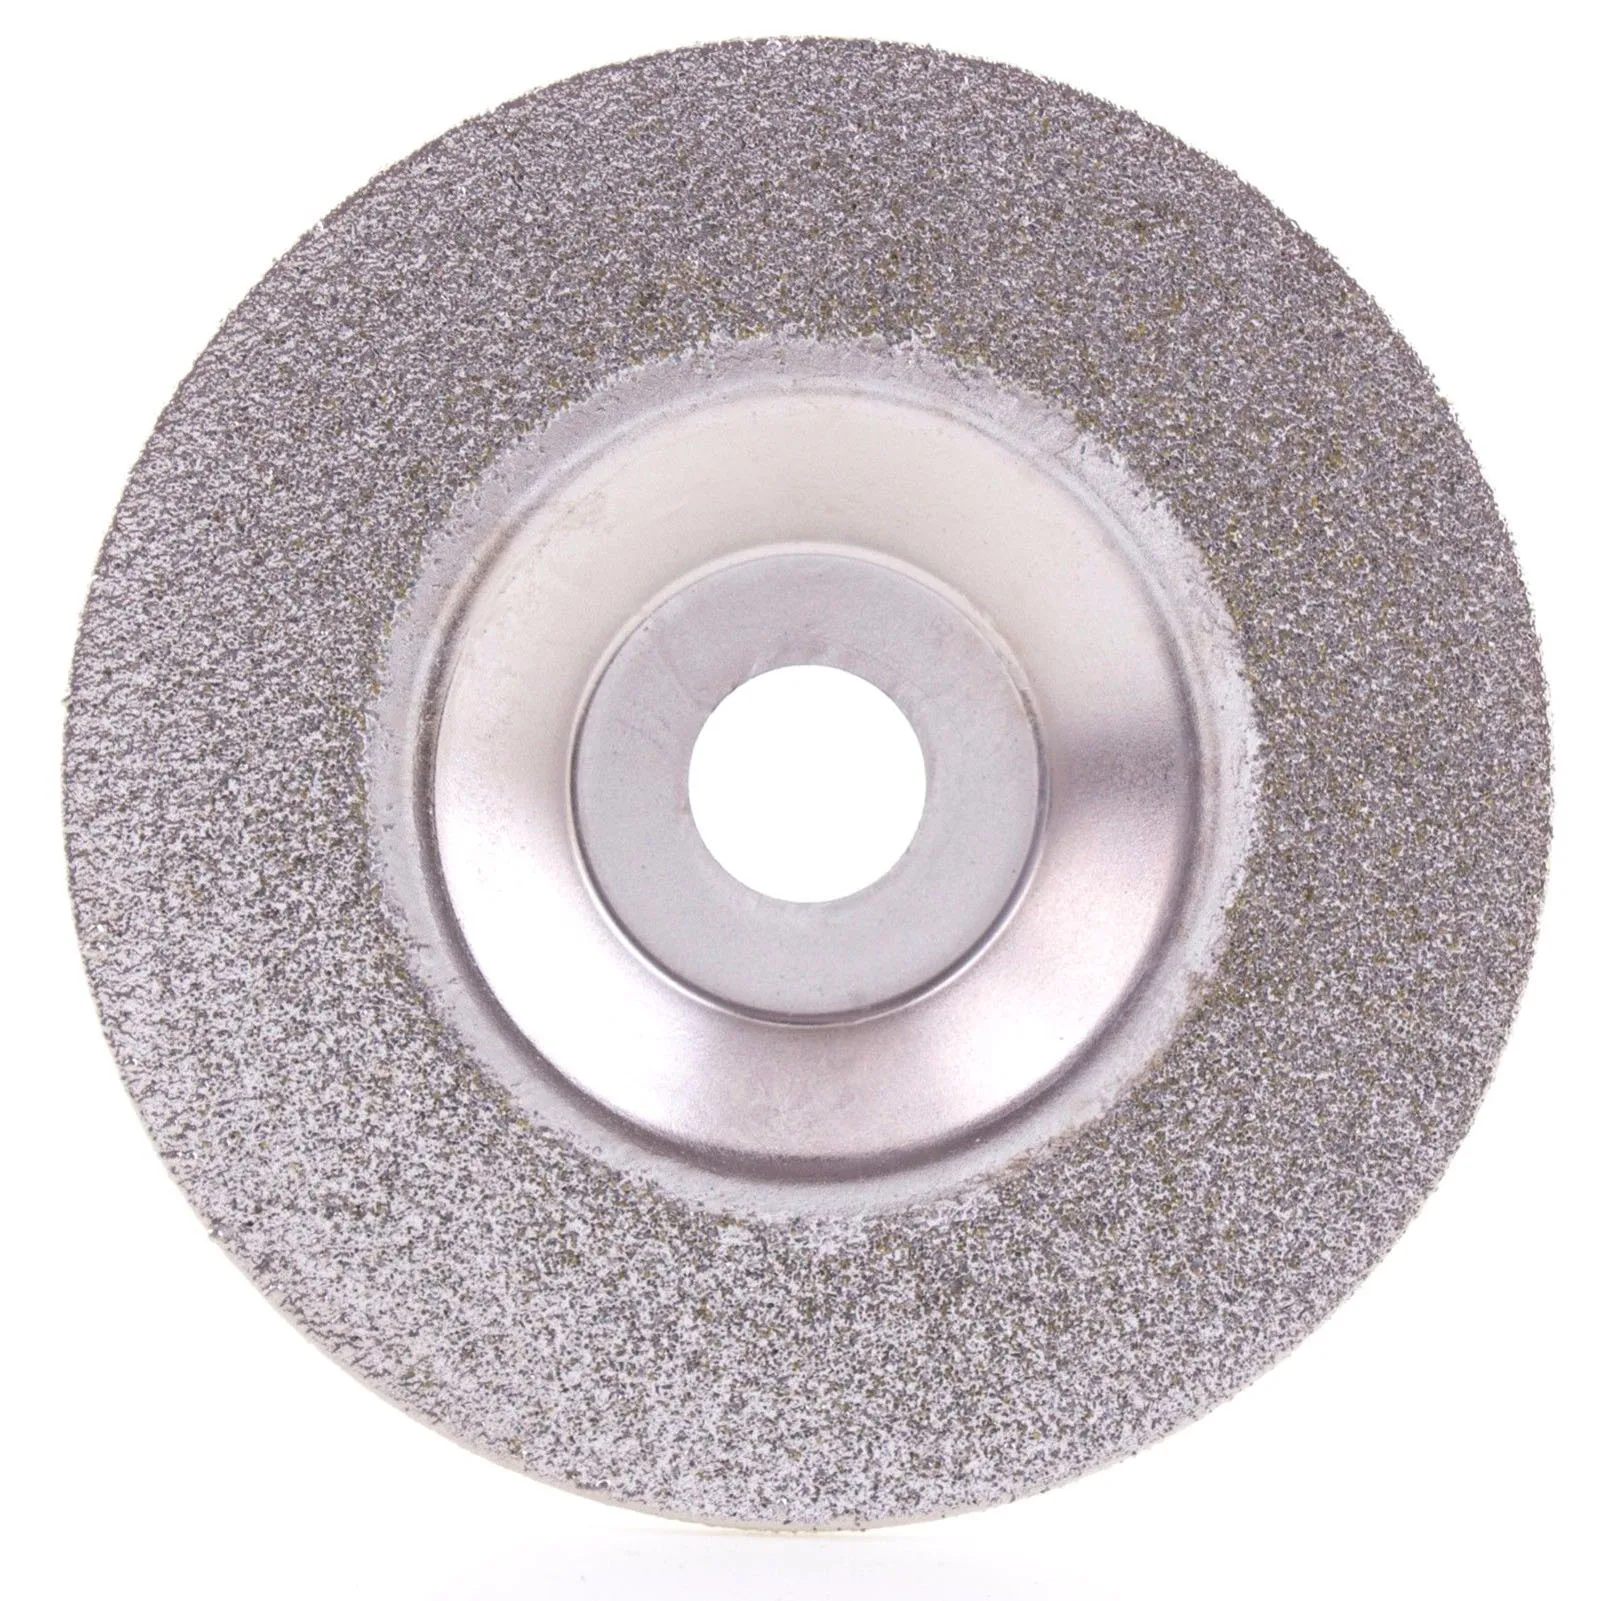 

4 inch Diamond Grinding Disc Wheel Coated Grit 60 Convex Stone Tools For Angle Grinder Small Work Shops Numerous Applications